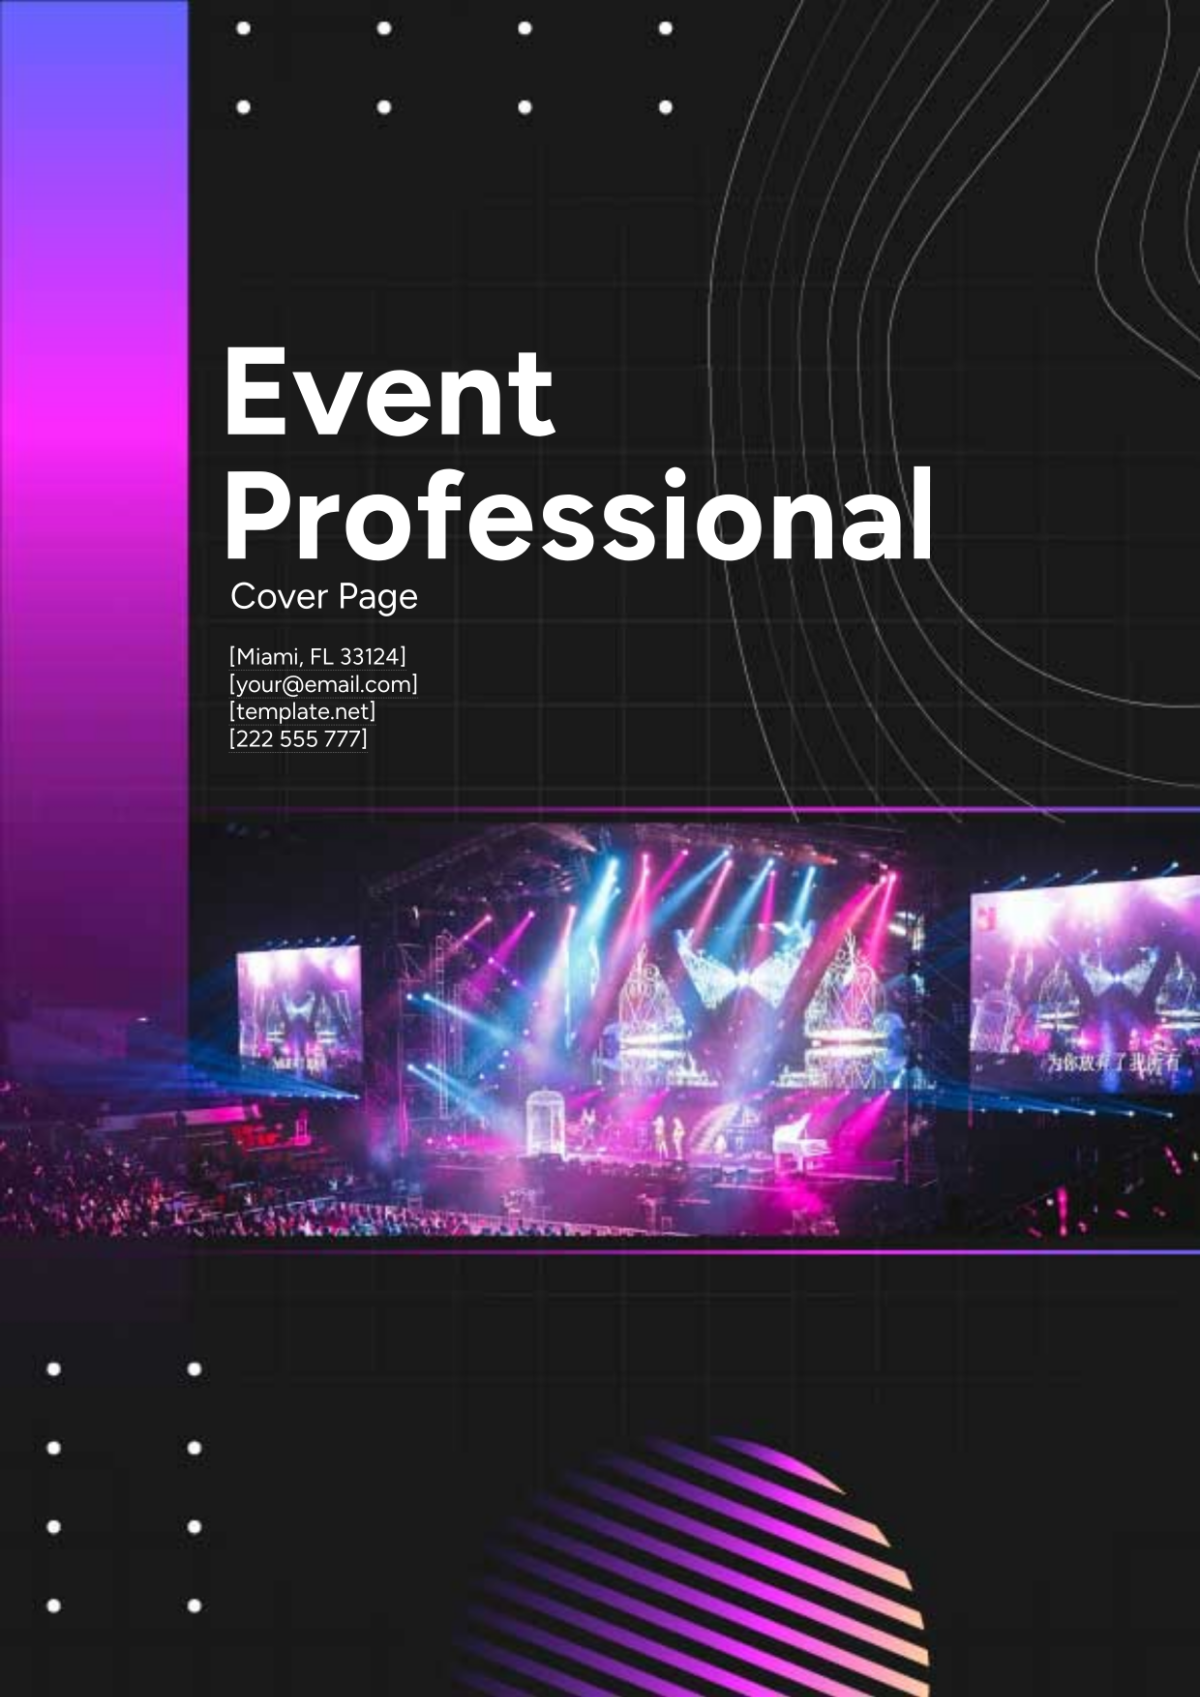 Event Professional Cover Page